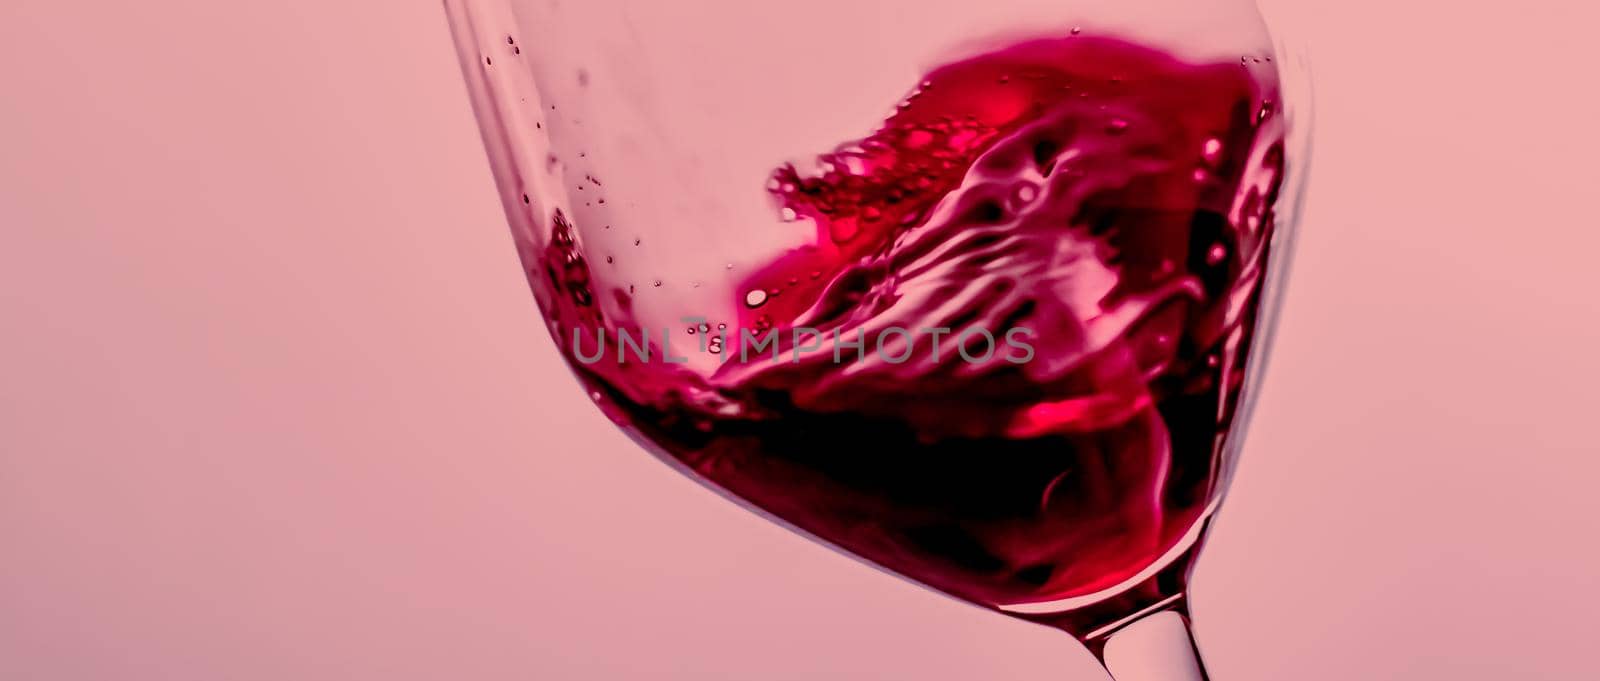 Red wine in crystal glass, alcohol drink and luxury aperitif, oenology and viticulture product.